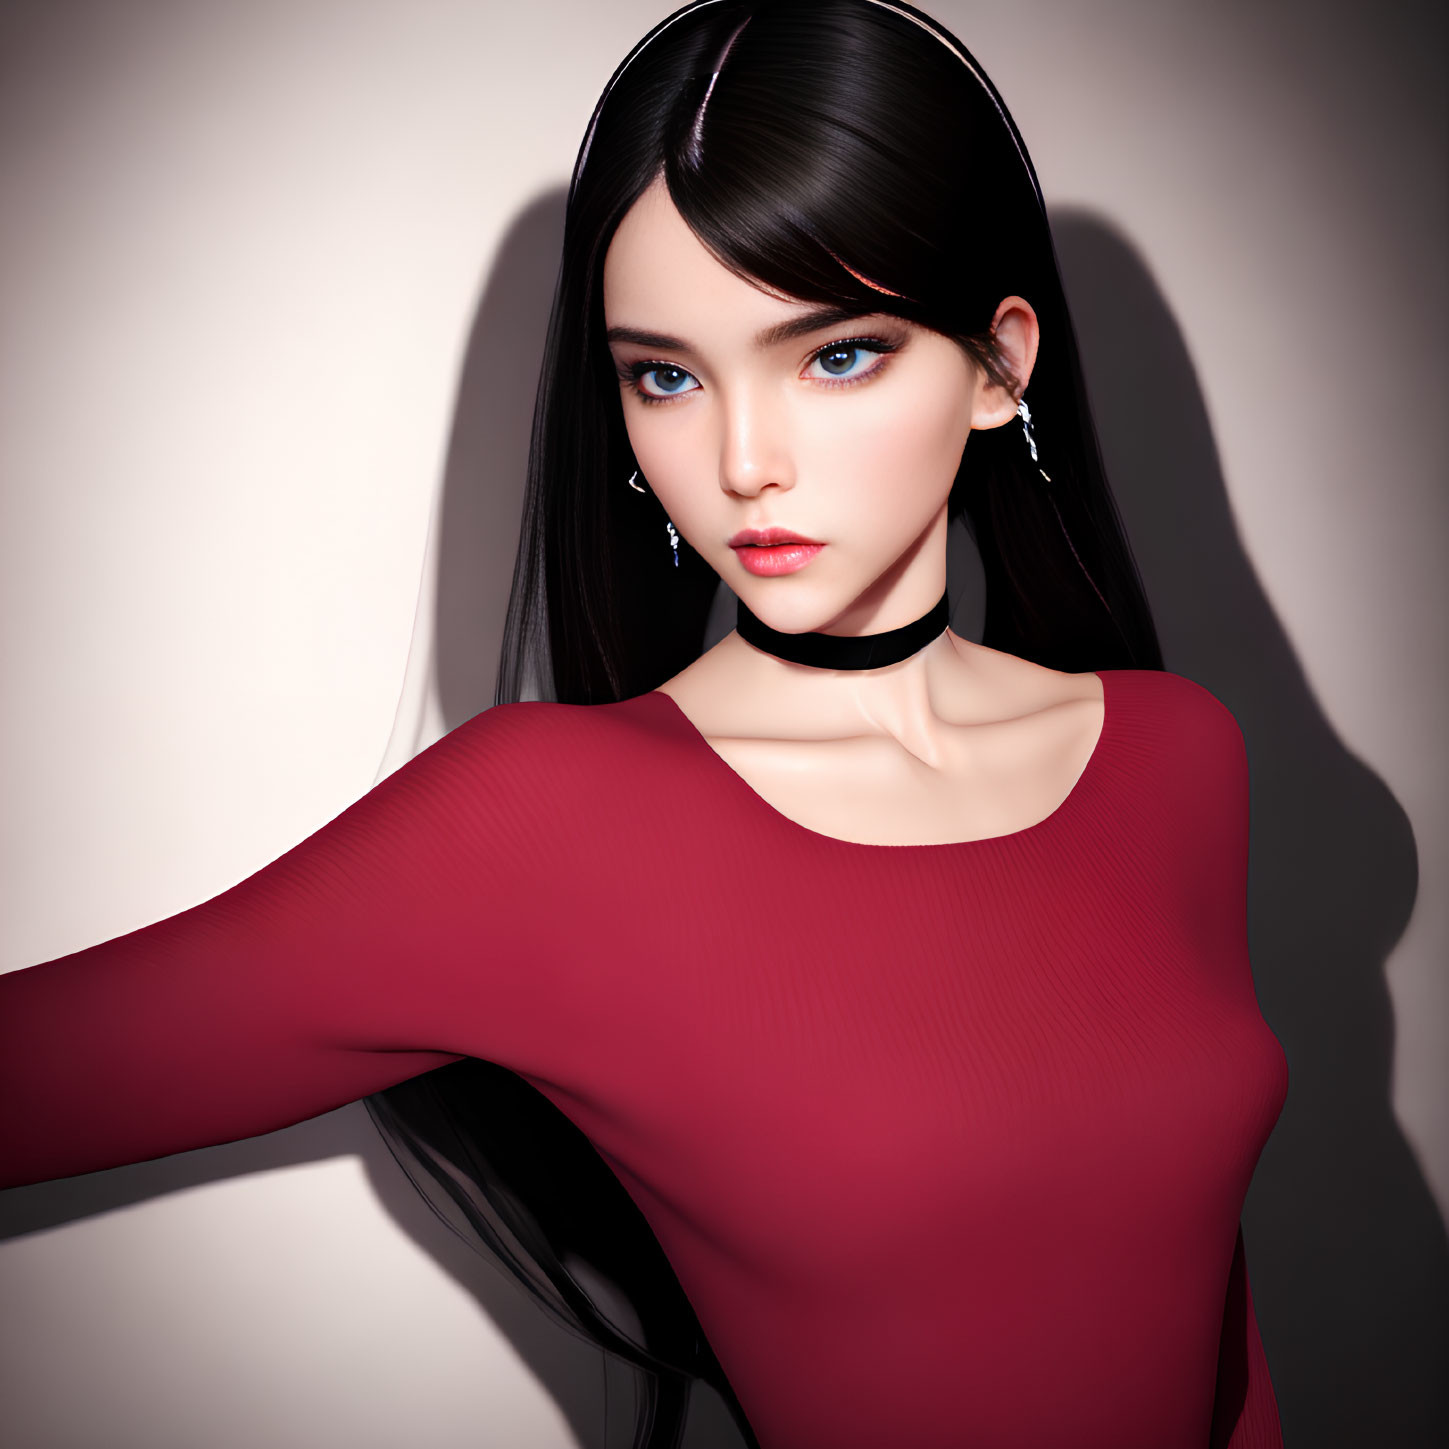 Woman with long black hair, blue eyes, red top, black choker, and earrings.